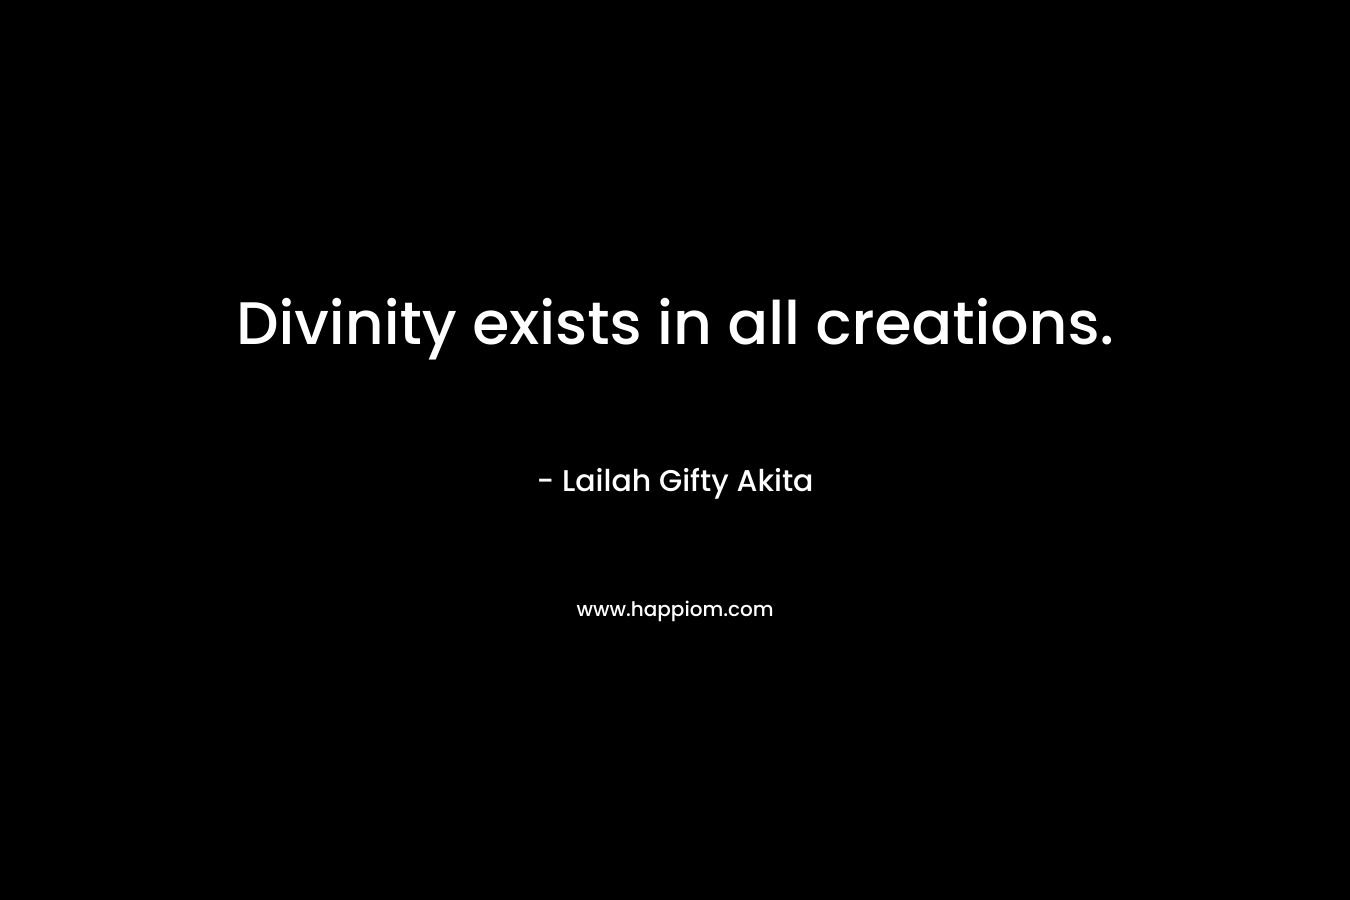 Divinity exists in all creations.